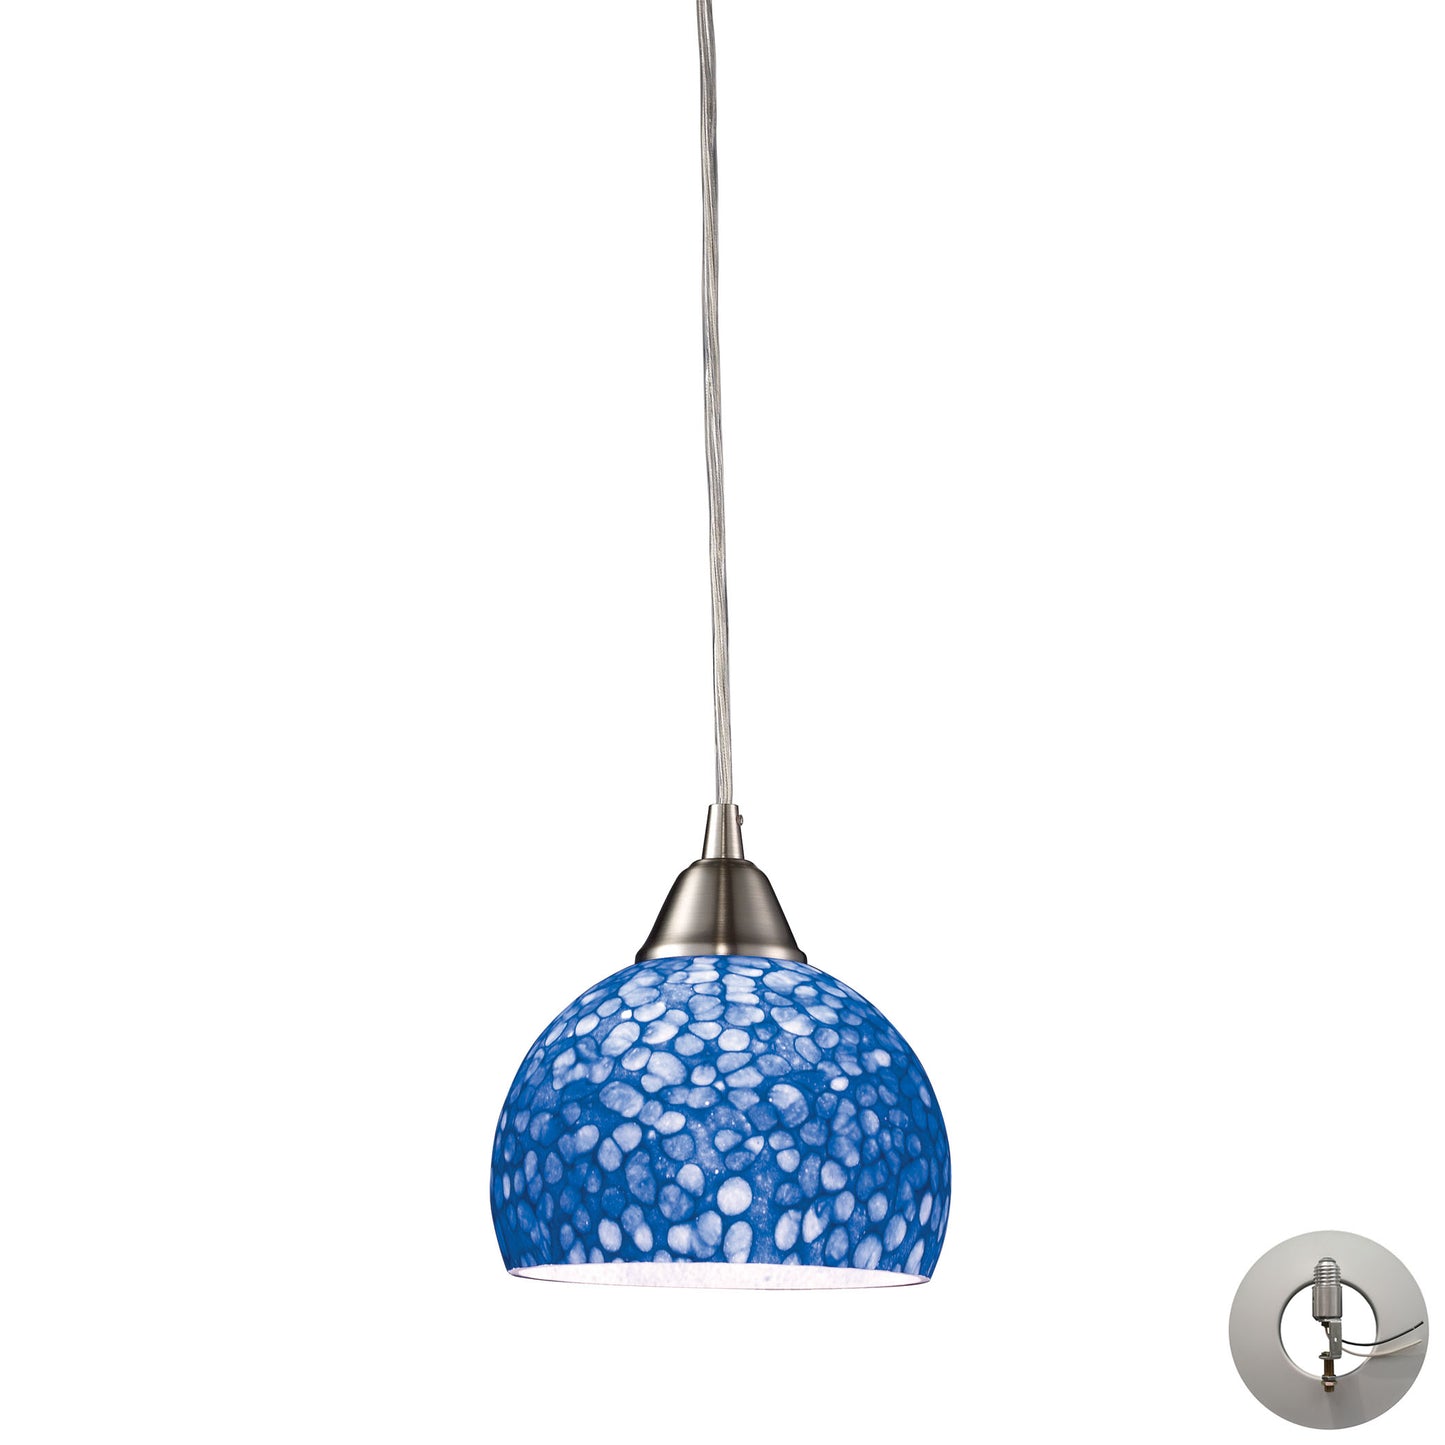 Cira 1-Light Mini Pendant in Satin Nickel with Pebbled Blue Glass - Includes Adapter Kit